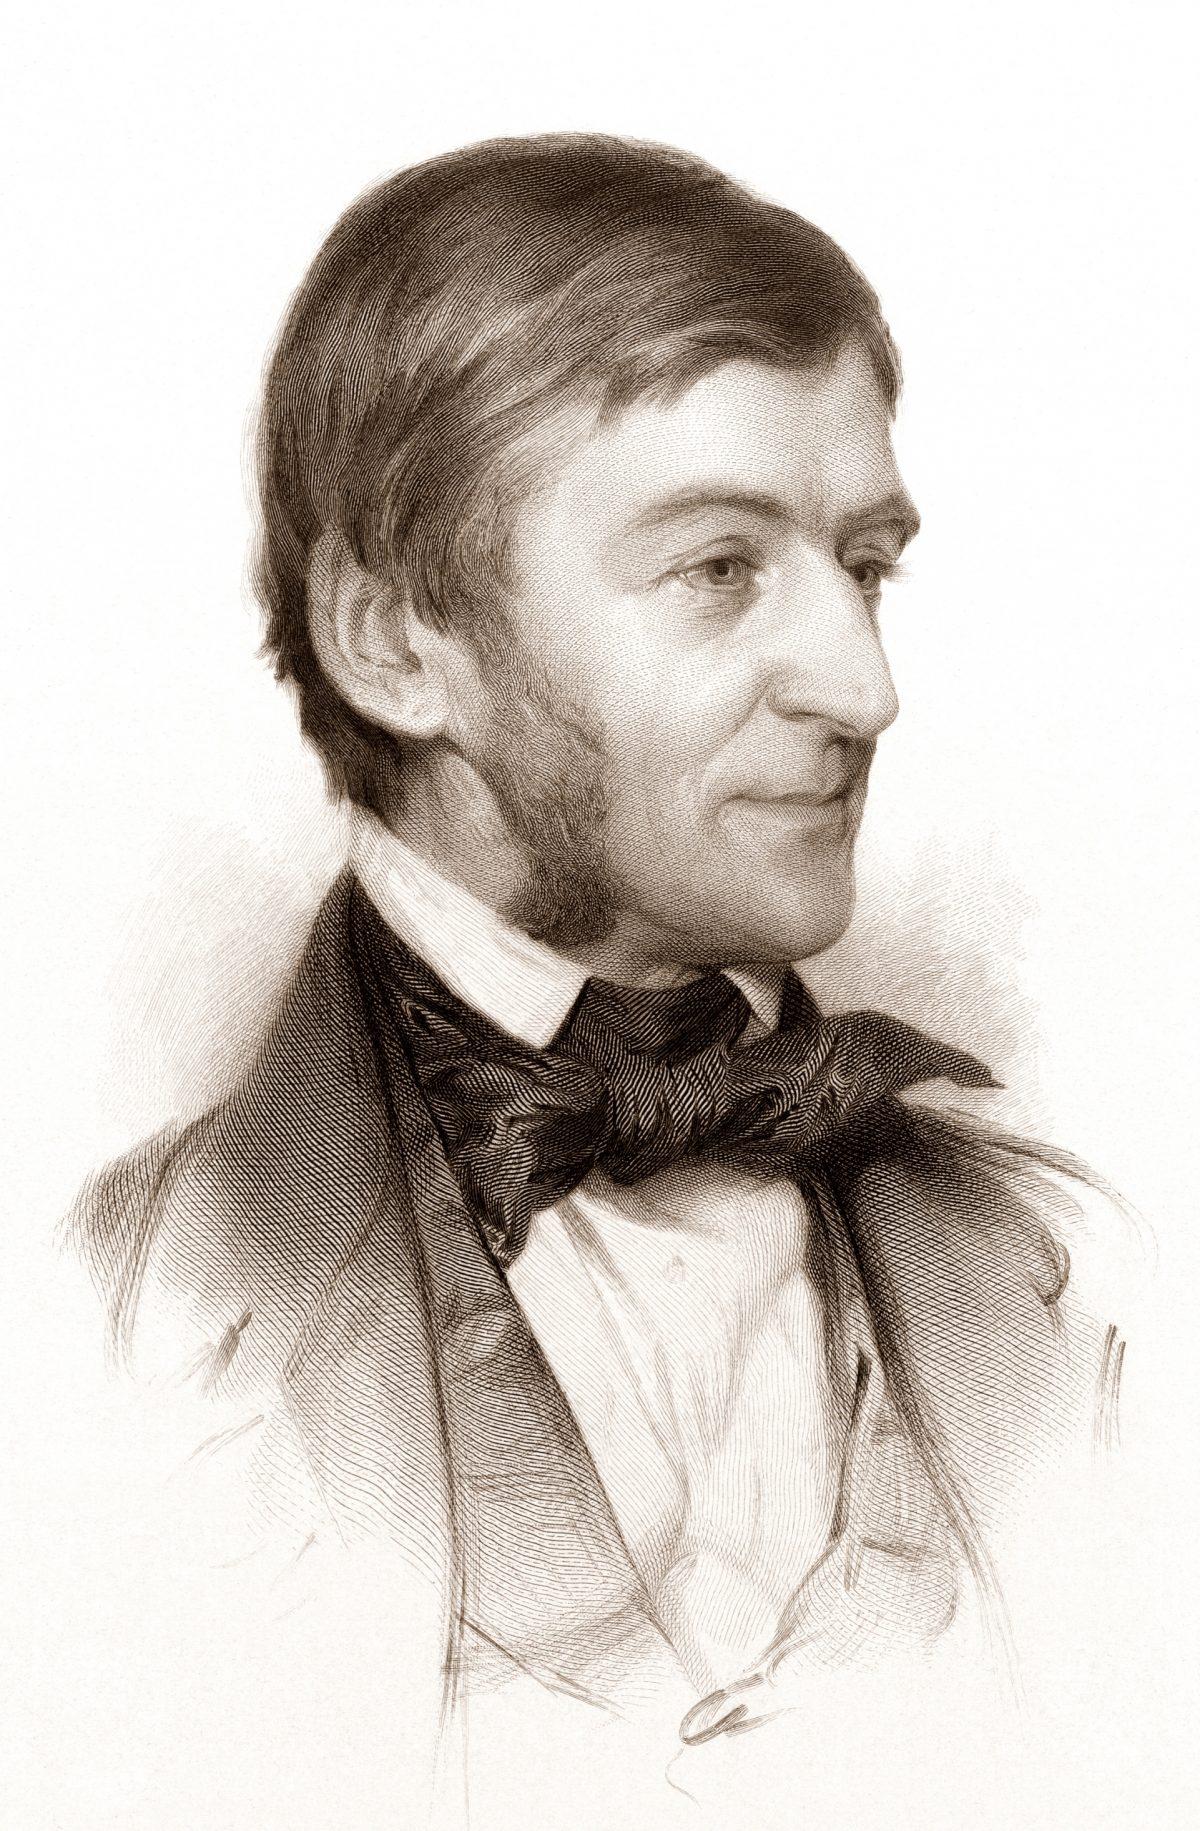 Portrait of Ralph Waldo Emerson, 1878, by Stephen Alonzo Schoff. An engraving after a drawing by Samuel Worcester Rowse, Library of Congress. (Public Domain)